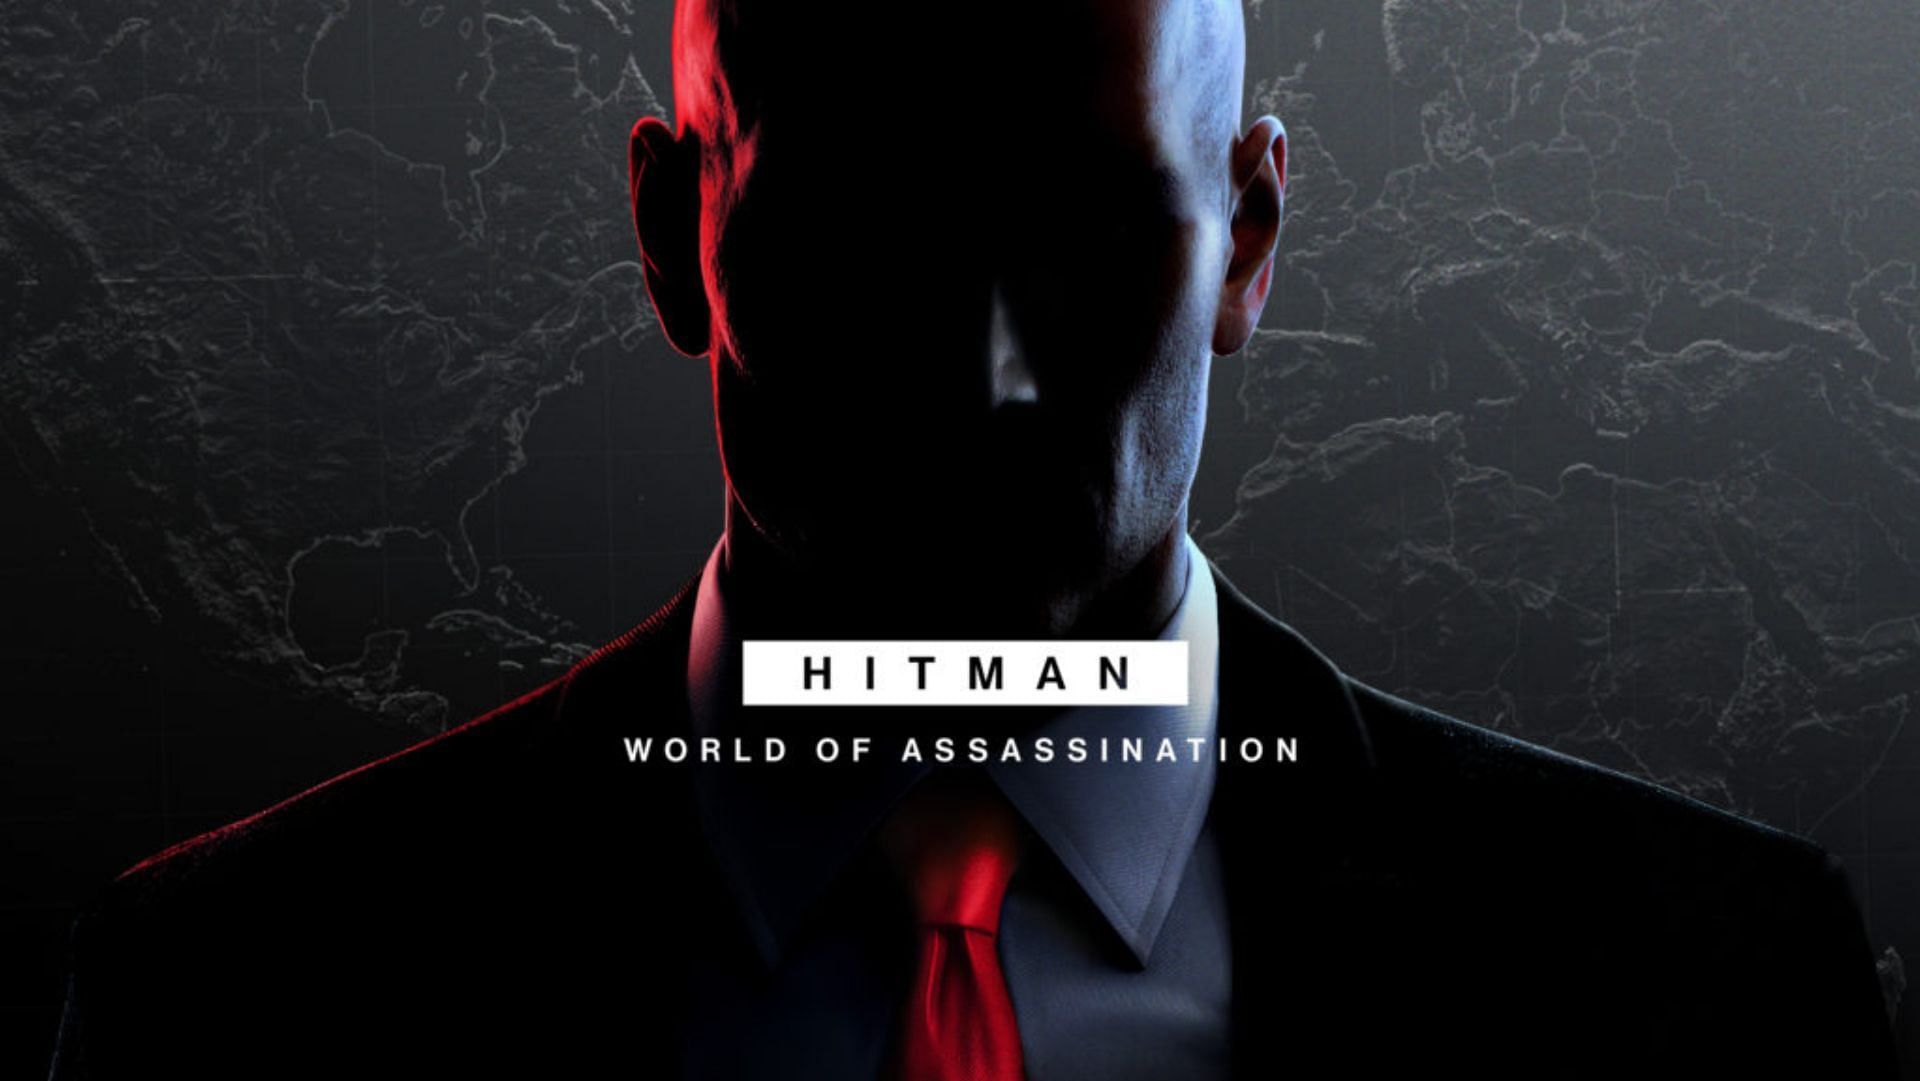 Hitman games to be combined and rebranded, "Hitman World of Assassination"